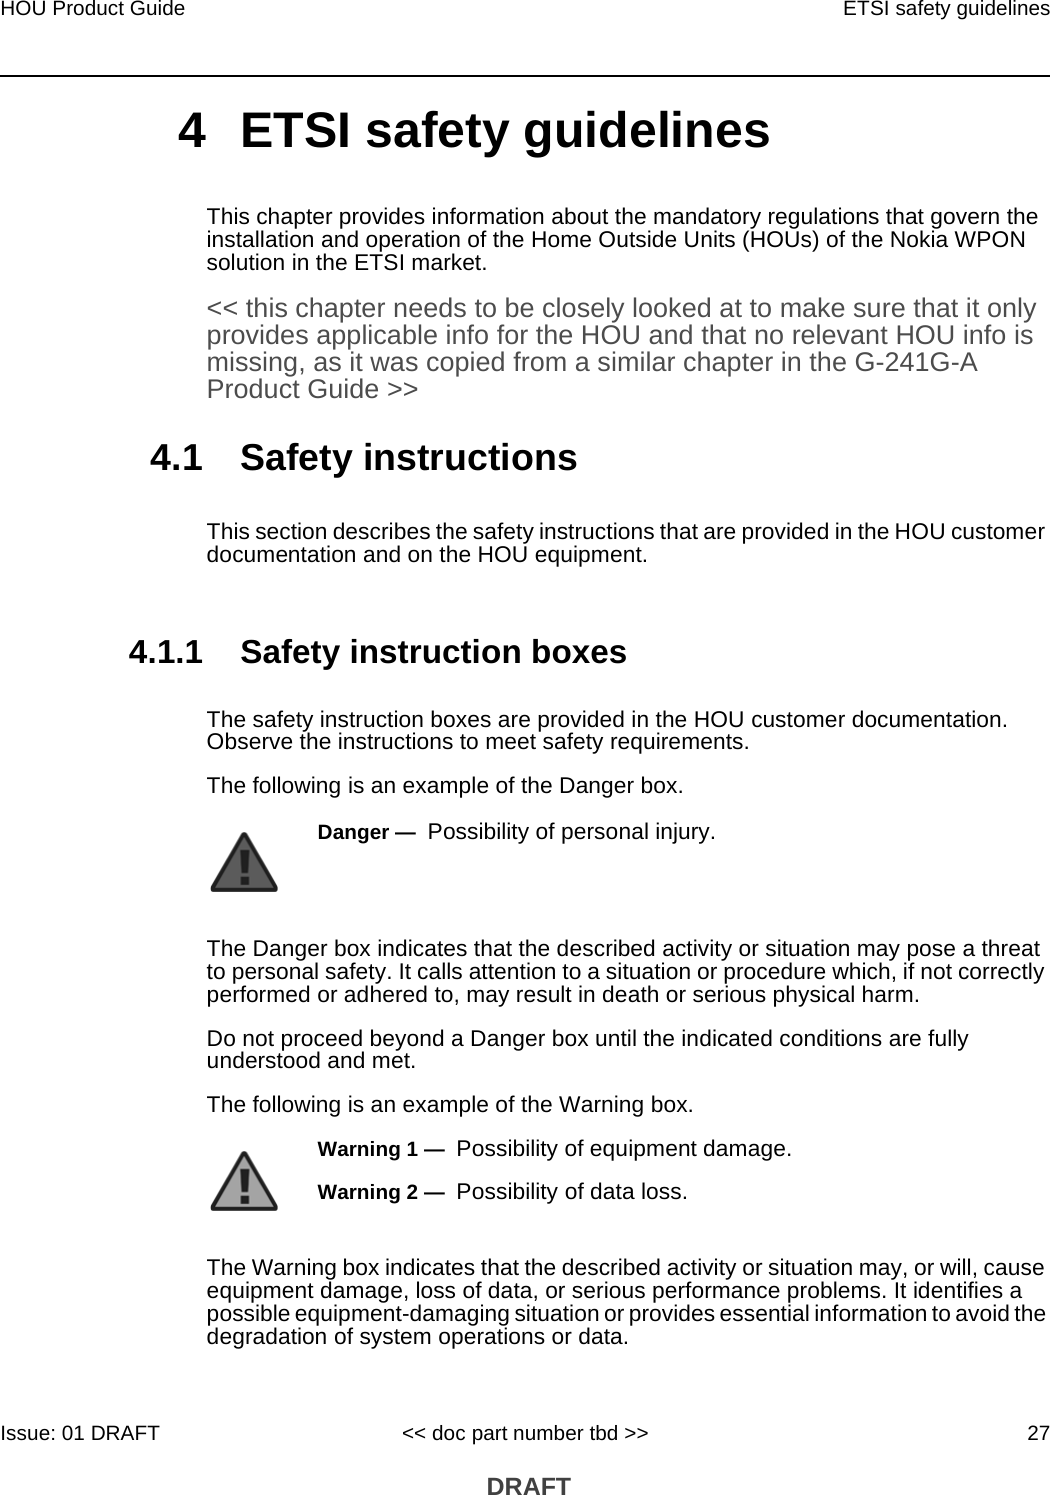 HOU Product Guide ETSI safety guidelinesIssue: 01 DRAFT &lt;&lt; doc part number tbd &gt;&gt; 27 DRAFT4 ETSI safety guidelinesThis chapter provides information about the mandatory regulations that govern the installation and operation of the Home Outside Units (HOUs) of the Nokia WPON solution in the ETSI market.&lt;&lt; this chapter needs to be closely looked at to make sure that it only provides applicable info for the HOU and that no relevant HOU info is missing, as it was copied from a similar chapter in the G-241G-A Product Guide &gt;&gt;4.1 Safety instructionsThis section describes the safety instructions that are provided in the HOU customer documentation and on the HOU equipment.4.1.1 Safety instruction boxesThe safety instruction boxes are provided in the HOU customer documentation. Observe the instructions to meet safety requirements.The following is an example of the Danger box.The Danger box indicates that the described activity or situation may pose a threat to personal safety. It calls attention to a situation or procedure which, if not correctly performed or adhered to, may result in death or serious physical harm. Do not proceed beyond a Danger box until the indicated conditions are fully understood and met.The following is an example of the Warning box.The Warning box indicates that the described activity or situation may, or will, cause equipment damage, loss of data, or serious performance problems. It identifies a possible equipment-damaging situation or provides essential information to avoid the degradation of system operations or data.Danger —  Possibility of personal injury. Warning 1 —  Possibility of equipment damage.Warning 2 —  Possibility of data loss.